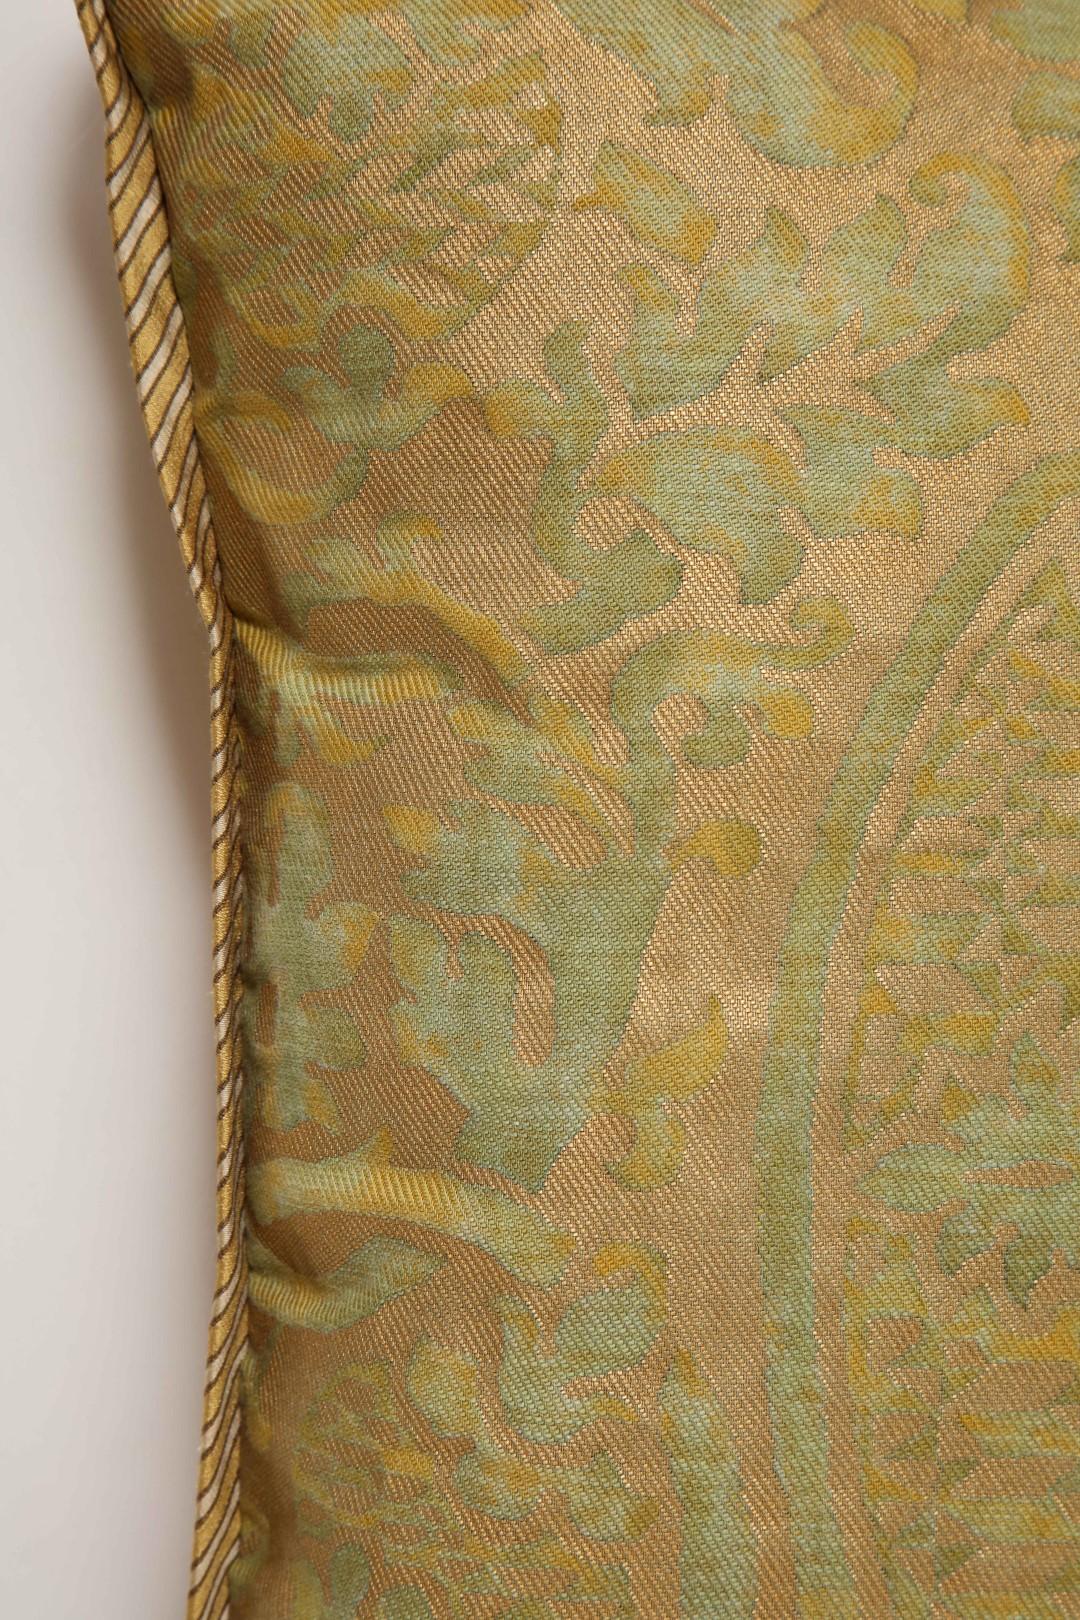 North American Single Fortuny Fabric Cushions in the Orsini Pattern